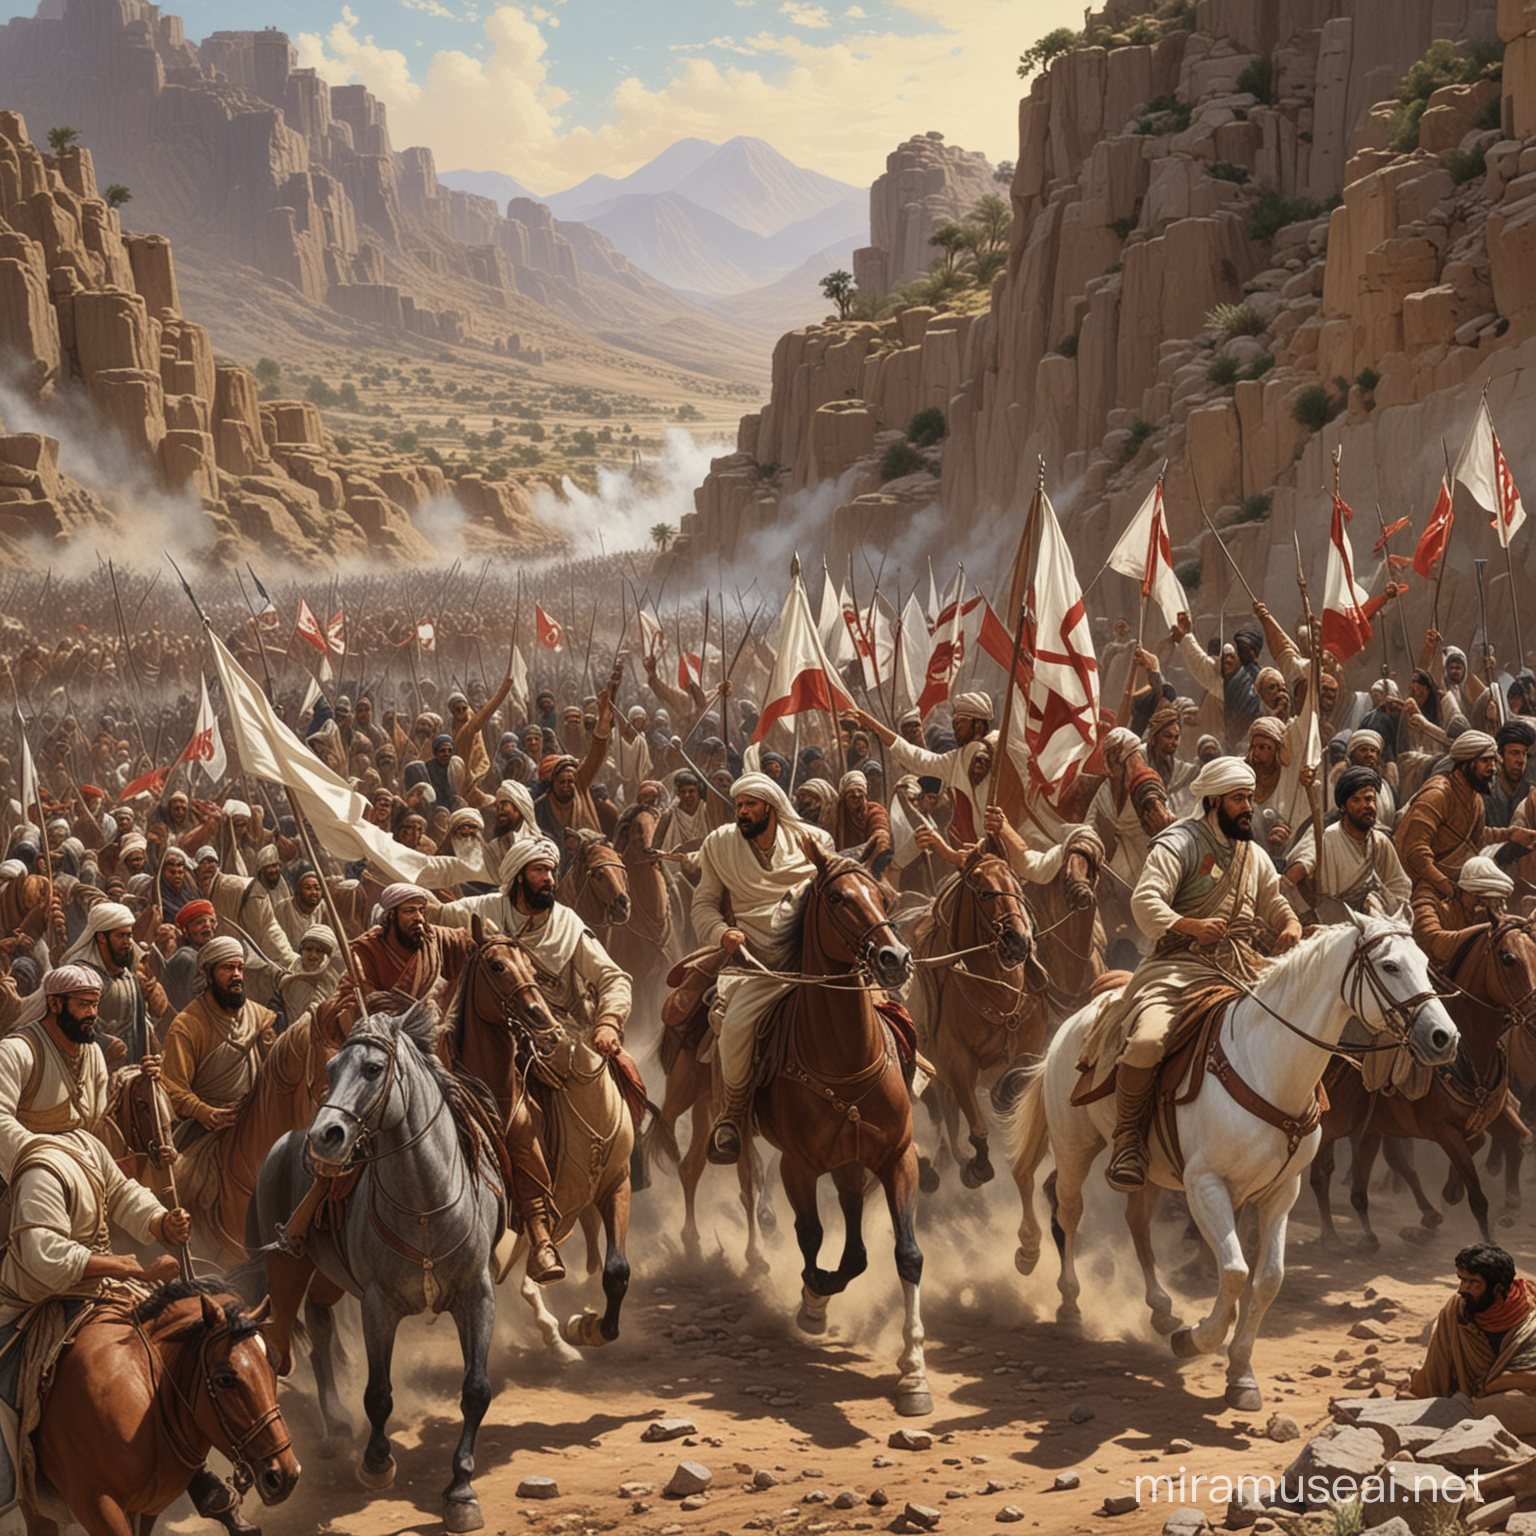 The Conquest of Khyber:
Khyber is a township 90 miles north of Medina, in a harra or volcanic tract, well-watered with many springs issuing forth from its basaltic rocks.
In [618 AD], a coalition of tribesmen, led by [Ali ibn Talib], launches a daring assault on the fortress of Khaybar, braving arrows and swords to claim victory. Through moments of chaos and heroism, they breach the gates, securing a hard-won triumph that echoes through the annals of history. Show only white flags. fights between jewish and pagan muslims.